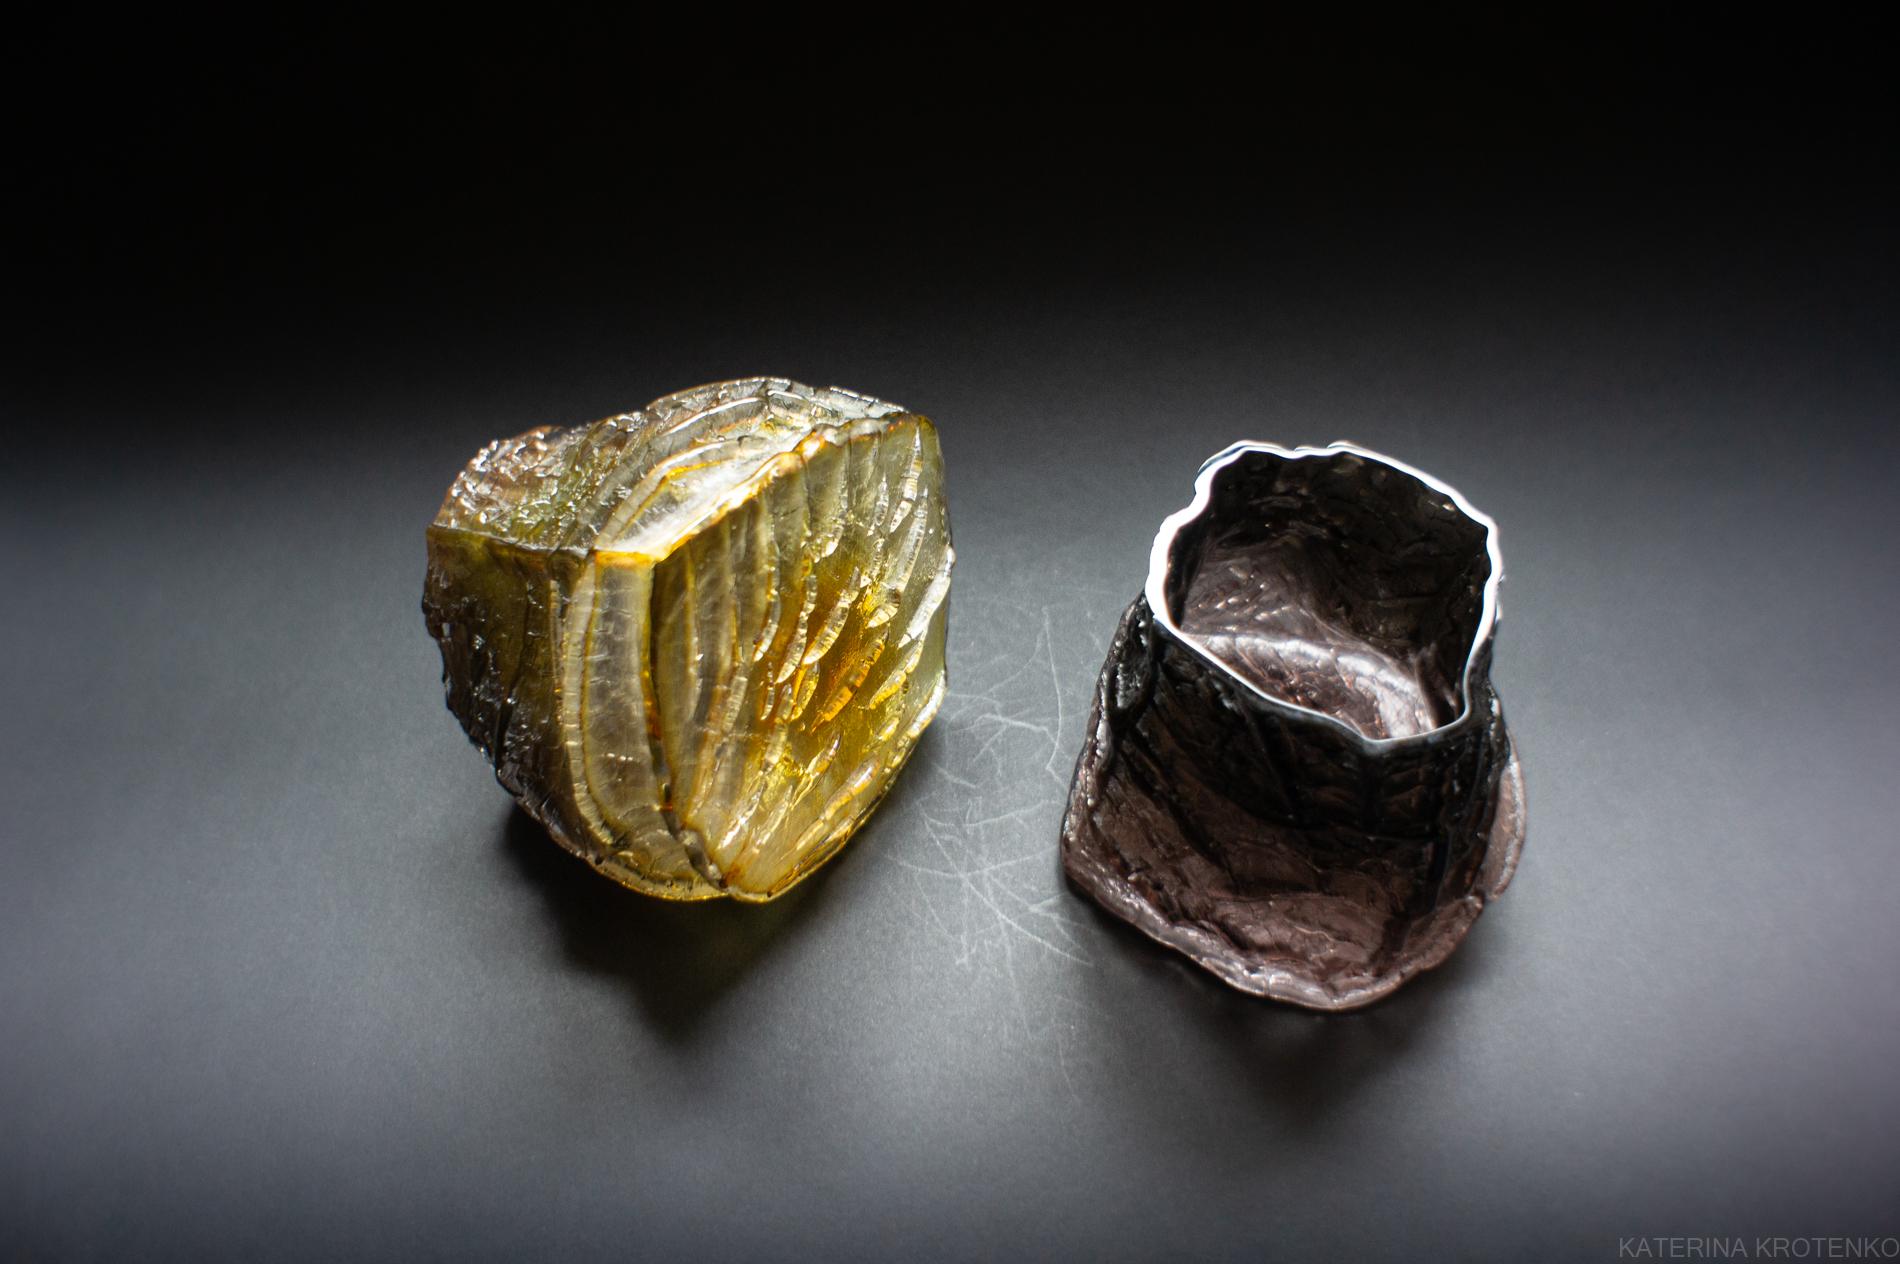 Drago — a pair of two glass treasuries, golden dragon & grounded brown - Sculpture by Katerina Krotenko